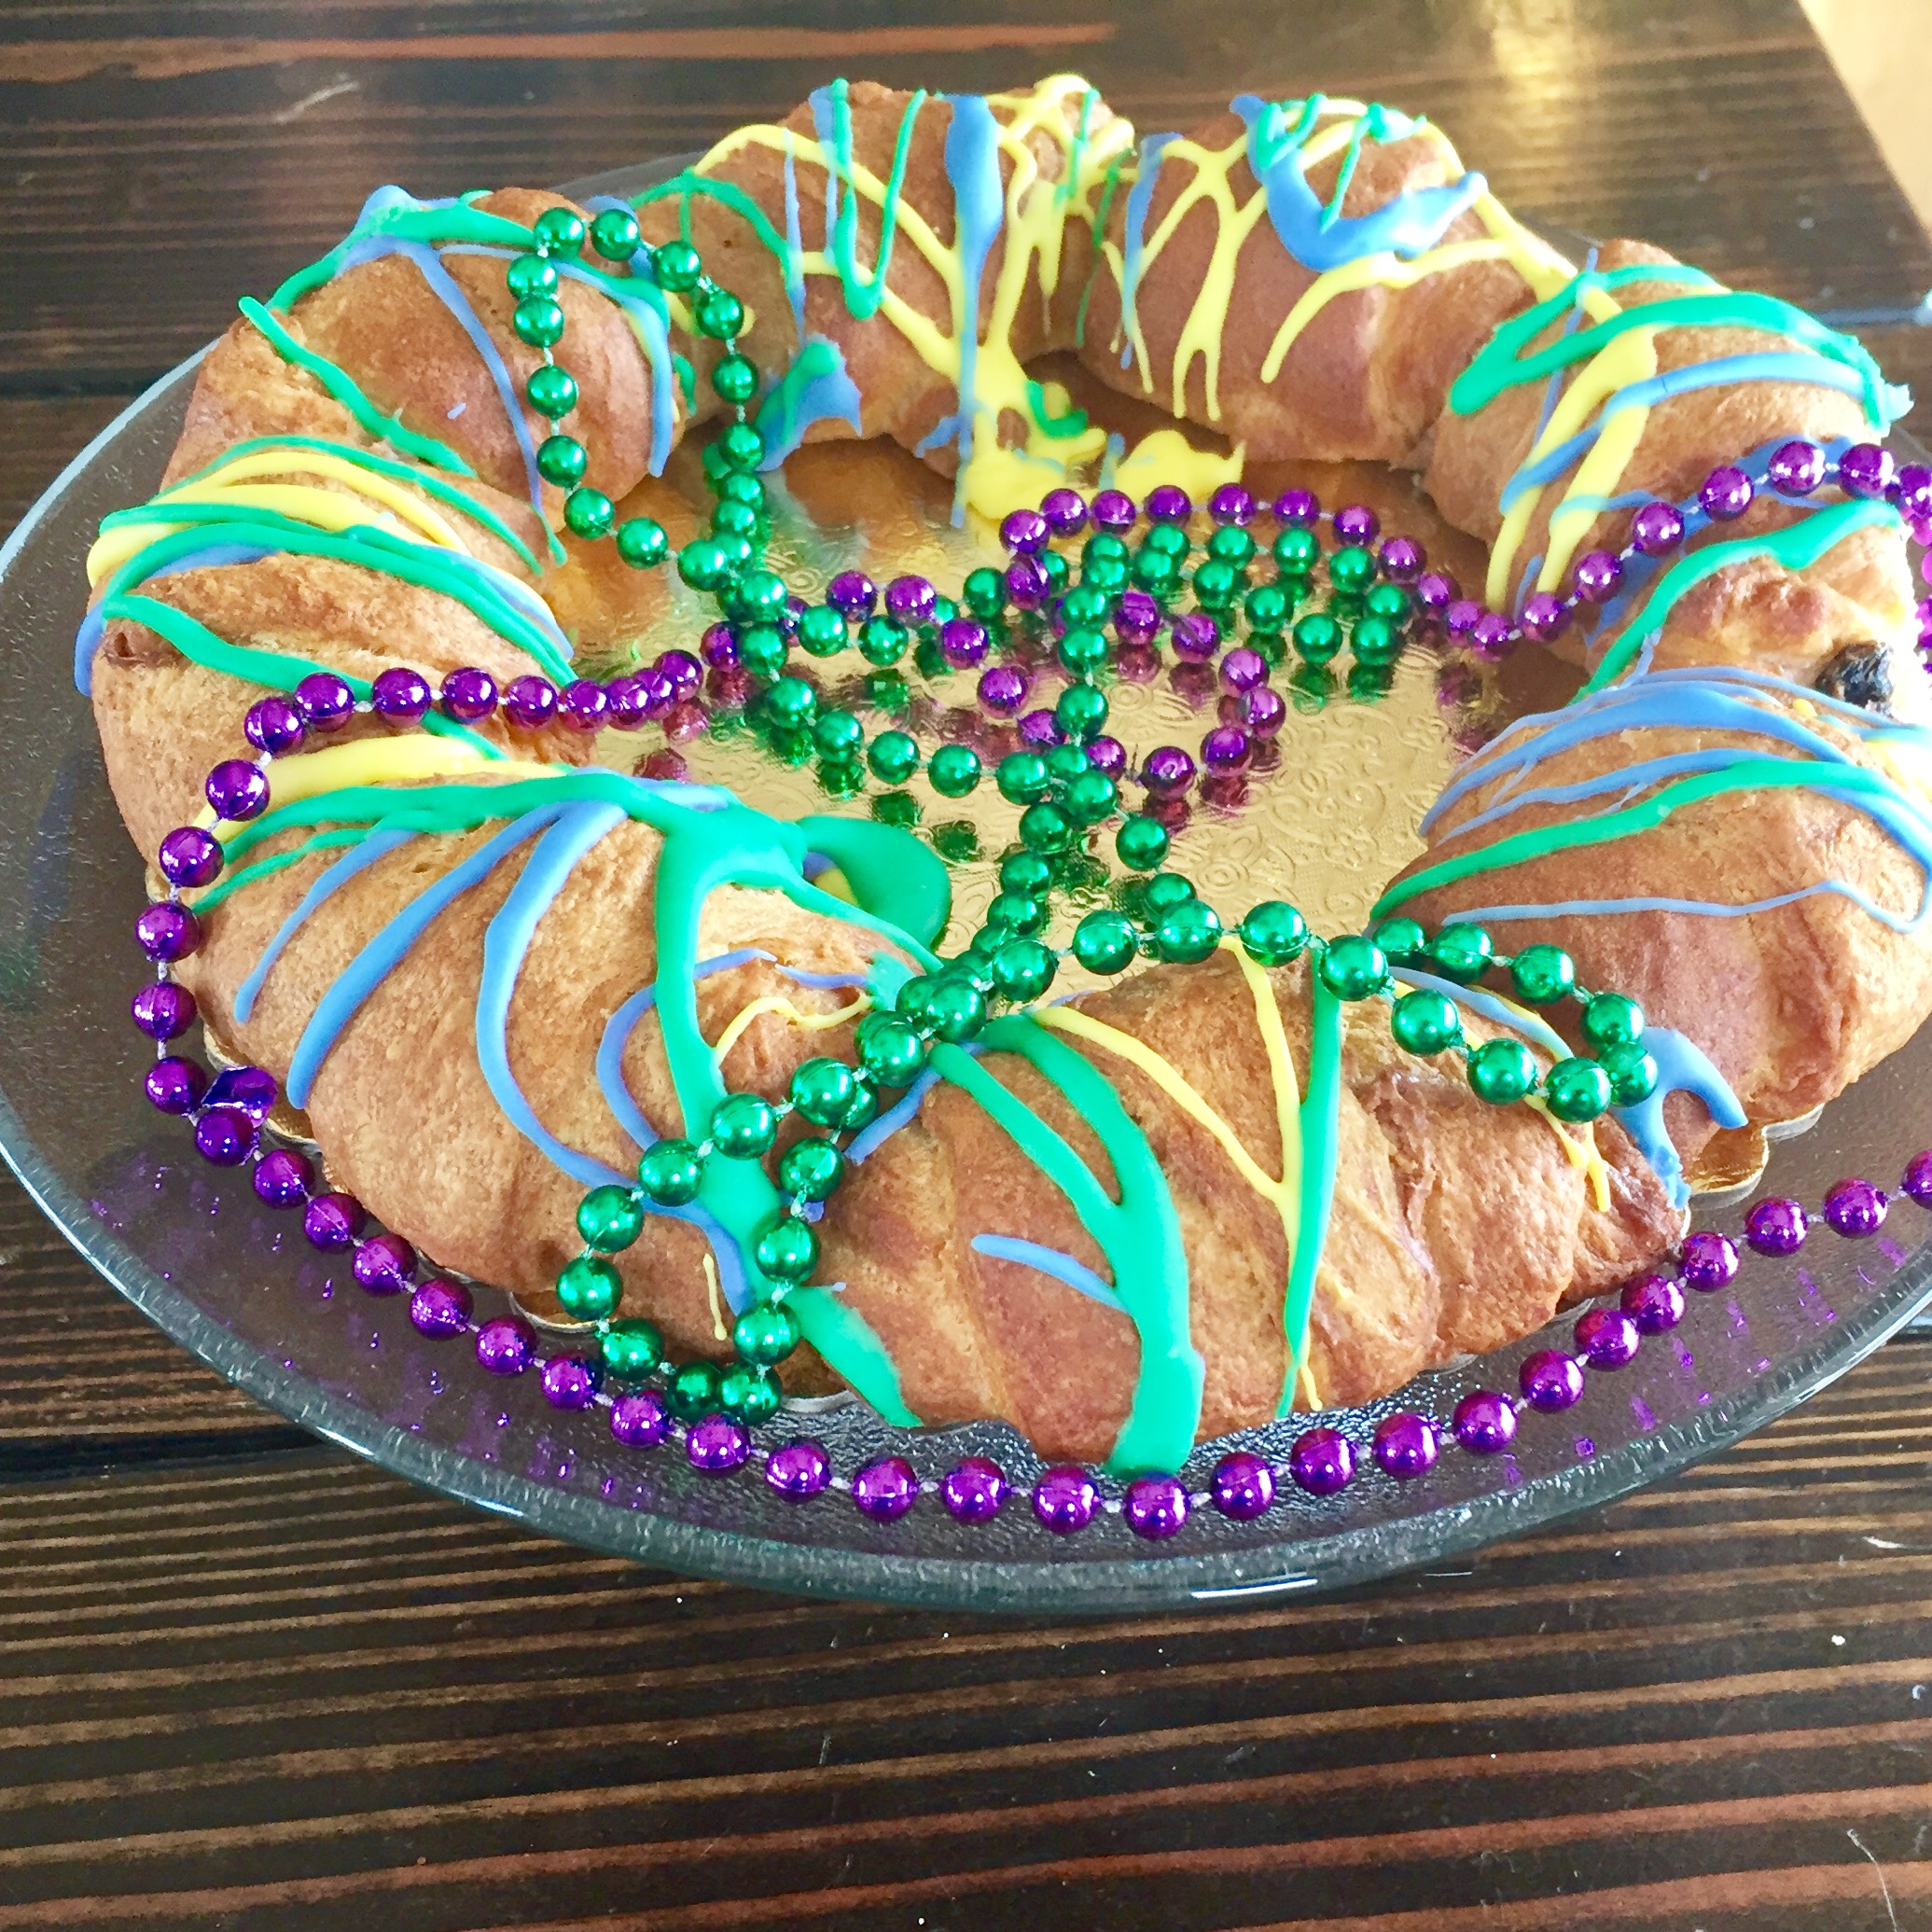 Phat Tuesday (the simplest of Mardi Gras)